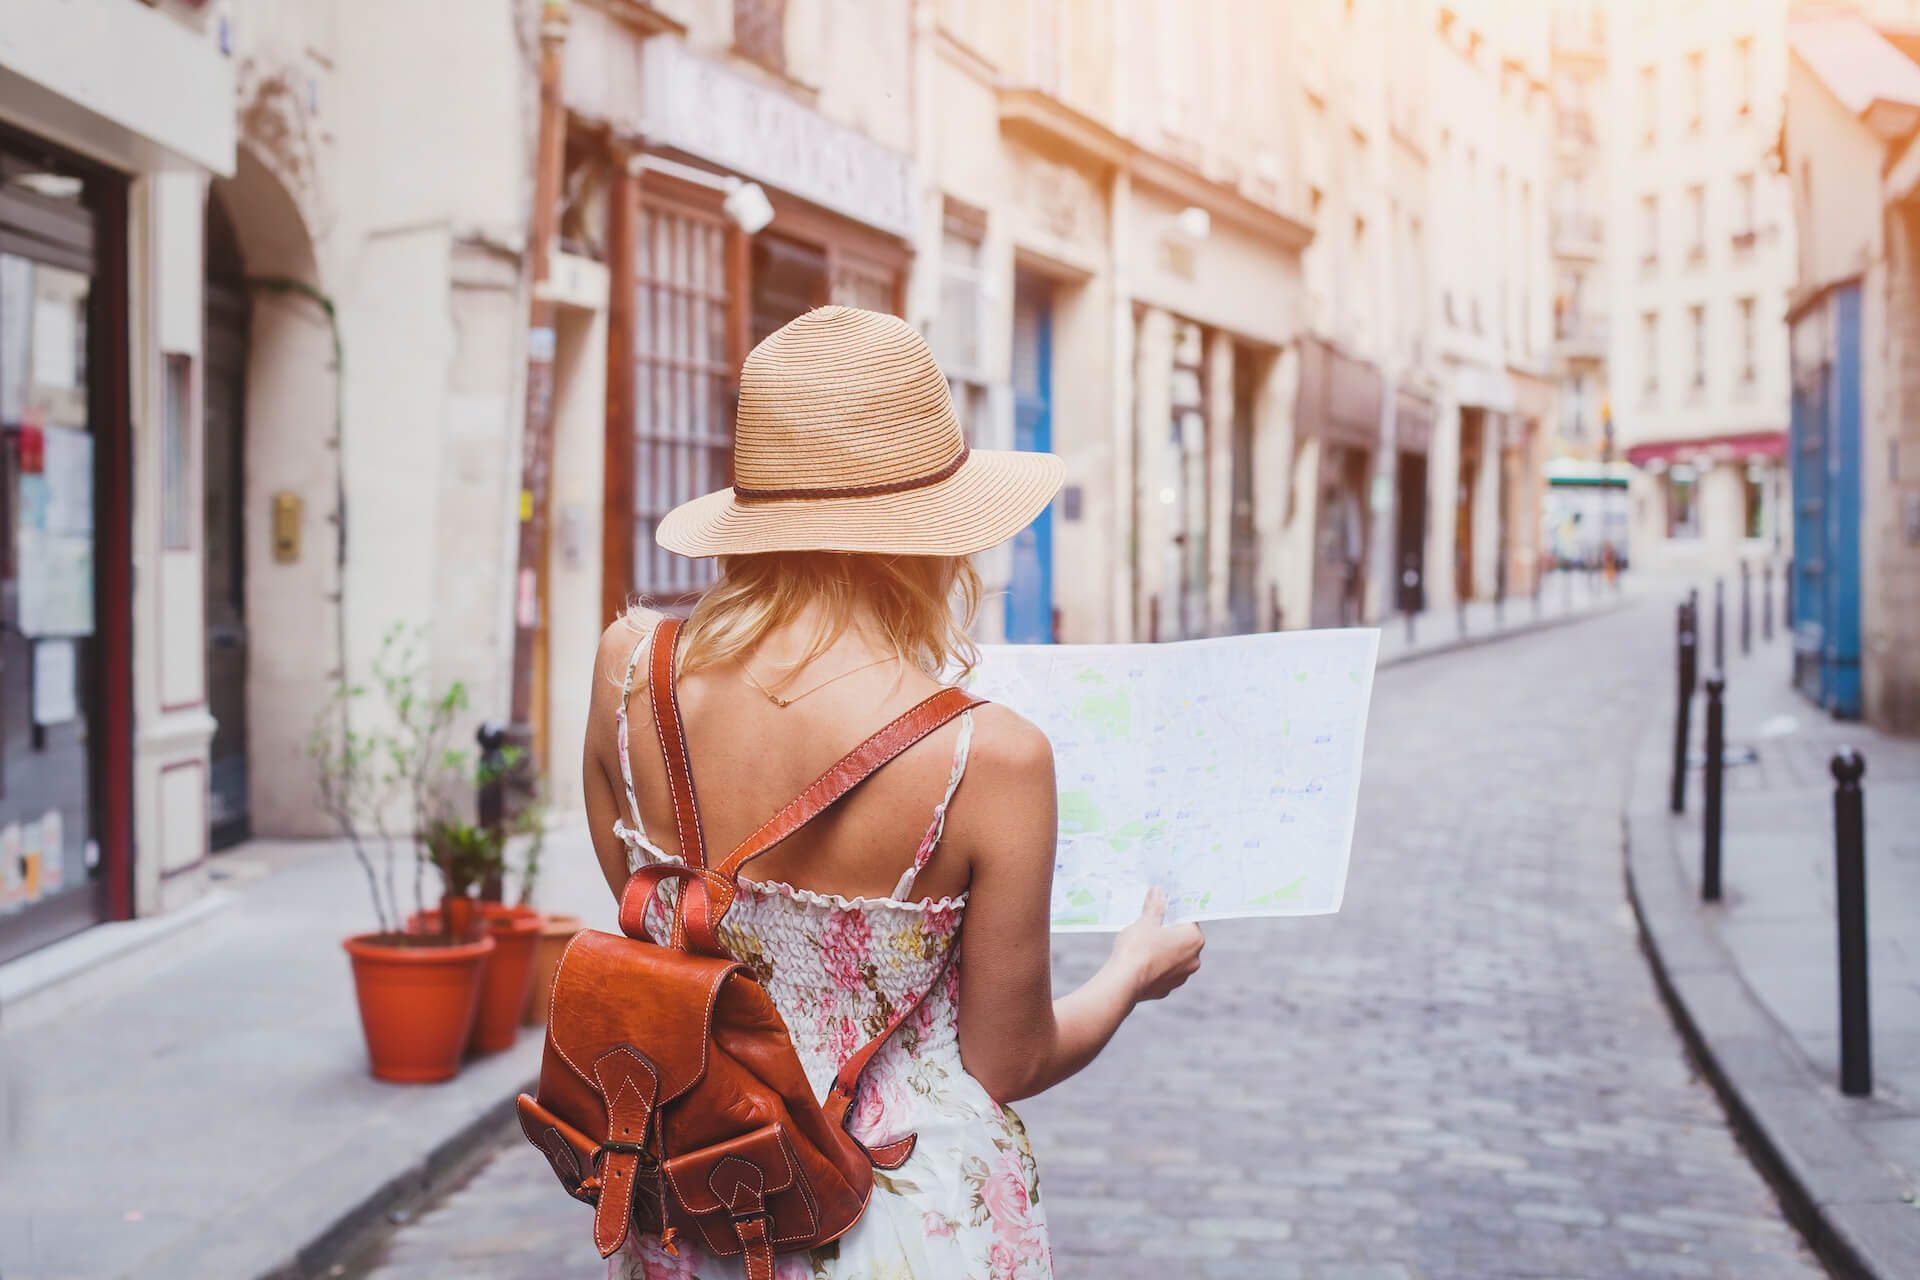 A woman is walking down a cobblestone street holding a map.